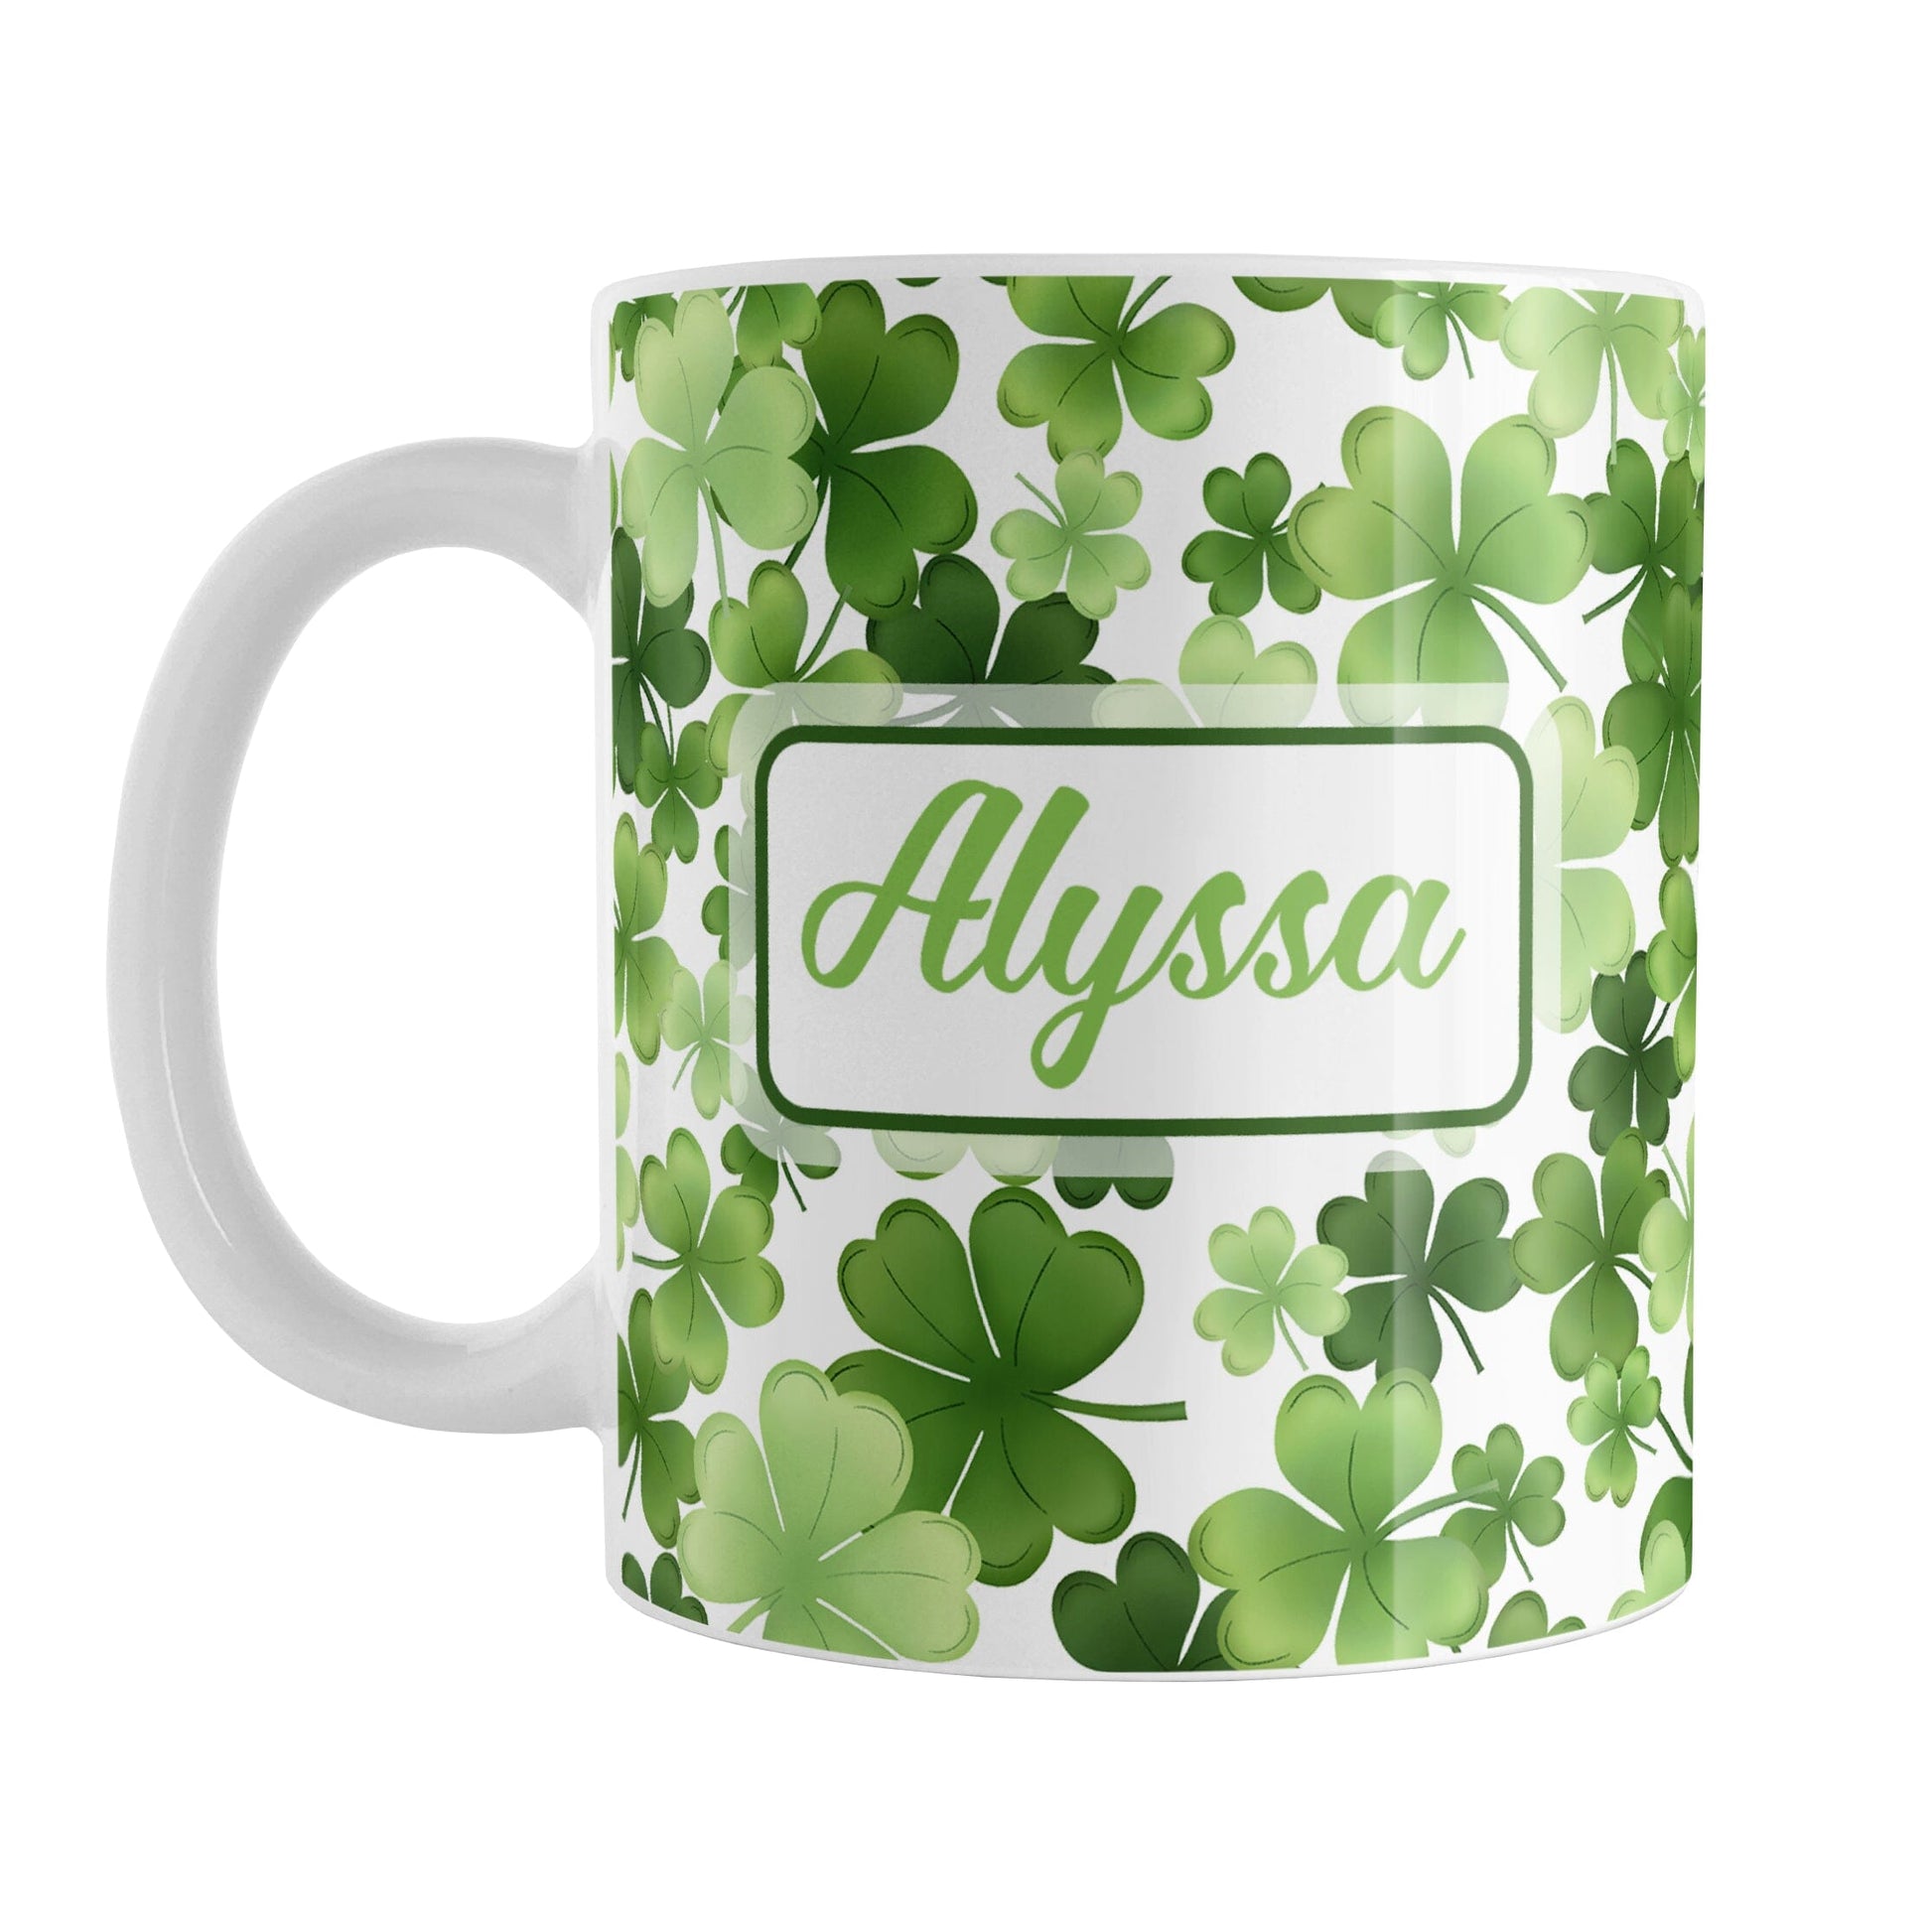 Personalized Shamrocks and 4-Leaf Clovers Mug (11oz) at Amy's Coffee Mugs. A ceramic coffee mug designed with an organic-like pattern of green shamrocks and 4-leaf clovers in different shades of green and is personalized with your name in green on both sides of the mug. This illustrated shamrocks pattern is printed around the mug up to the handle.